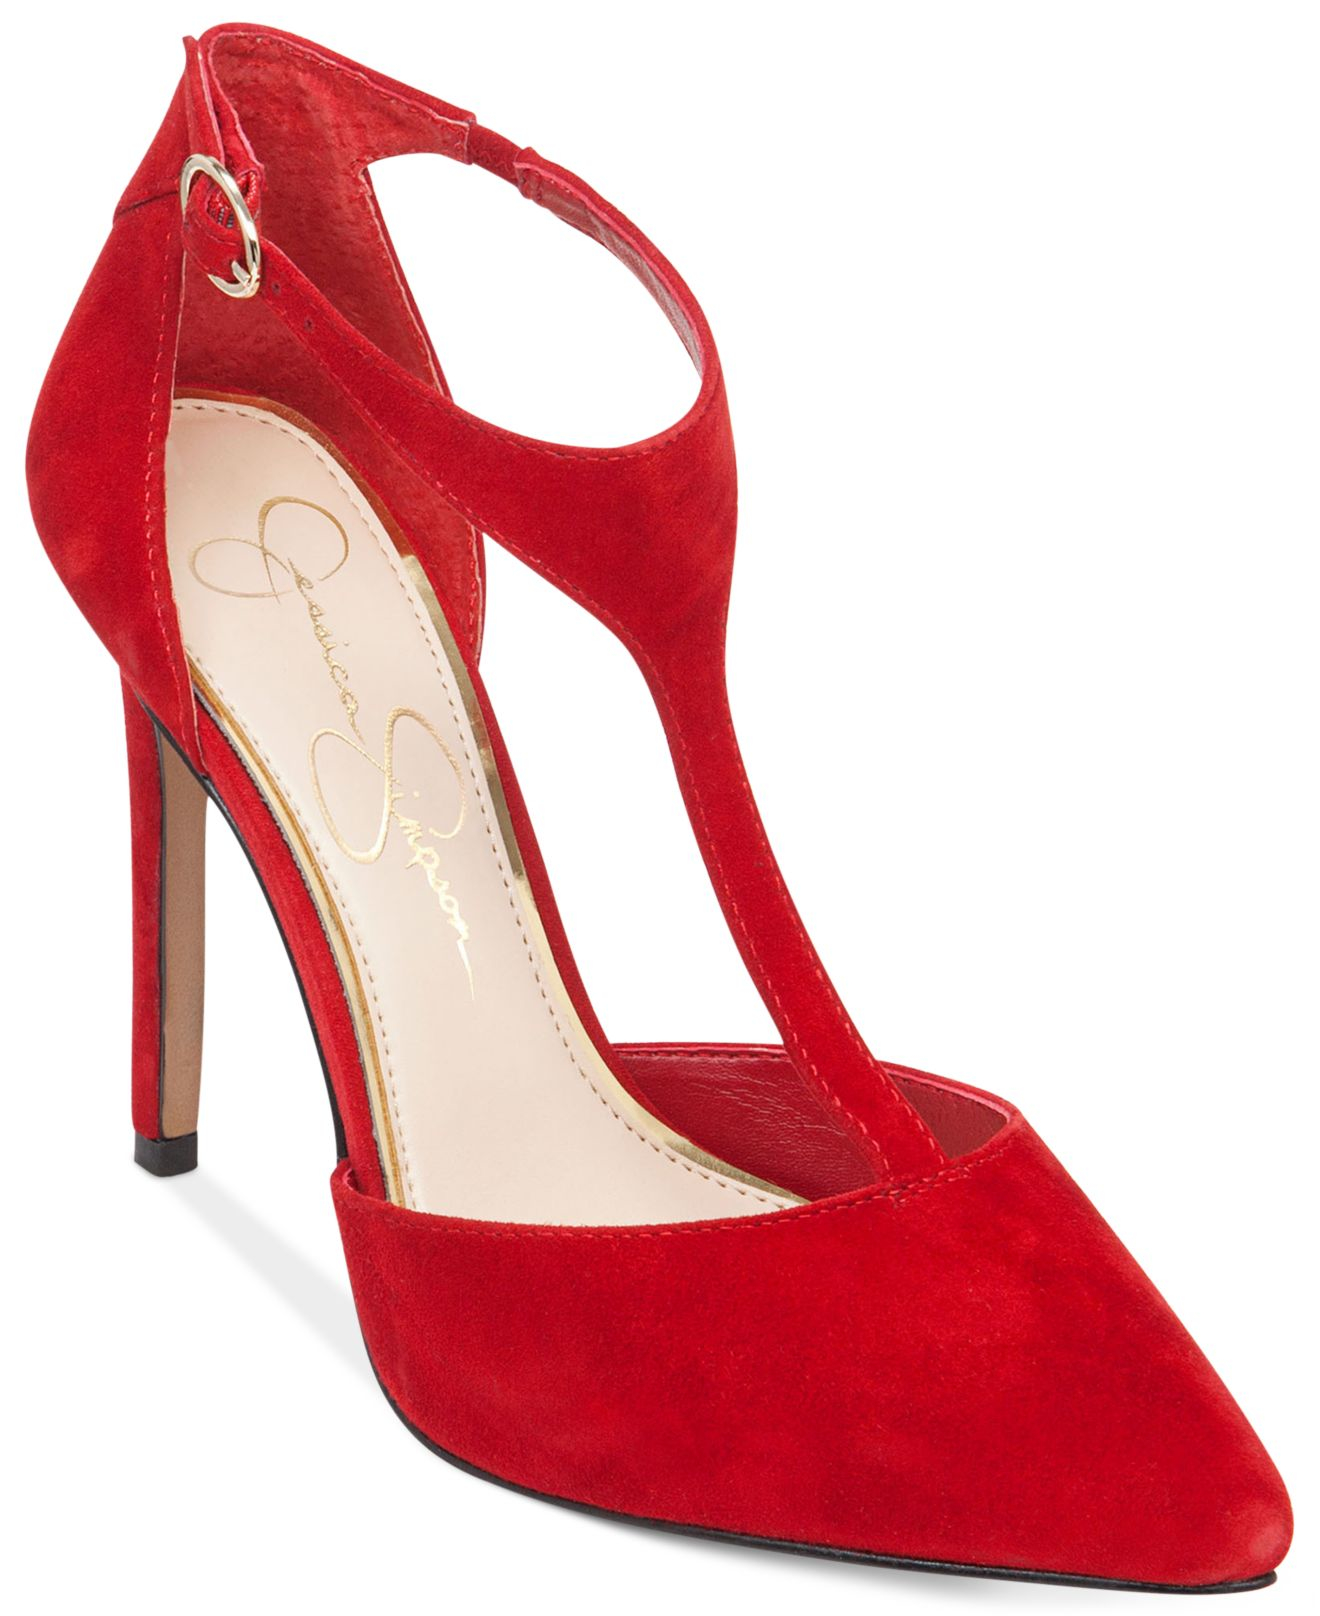 Jessica simpson Pixxel T-strap Pumps in Red | Lyst